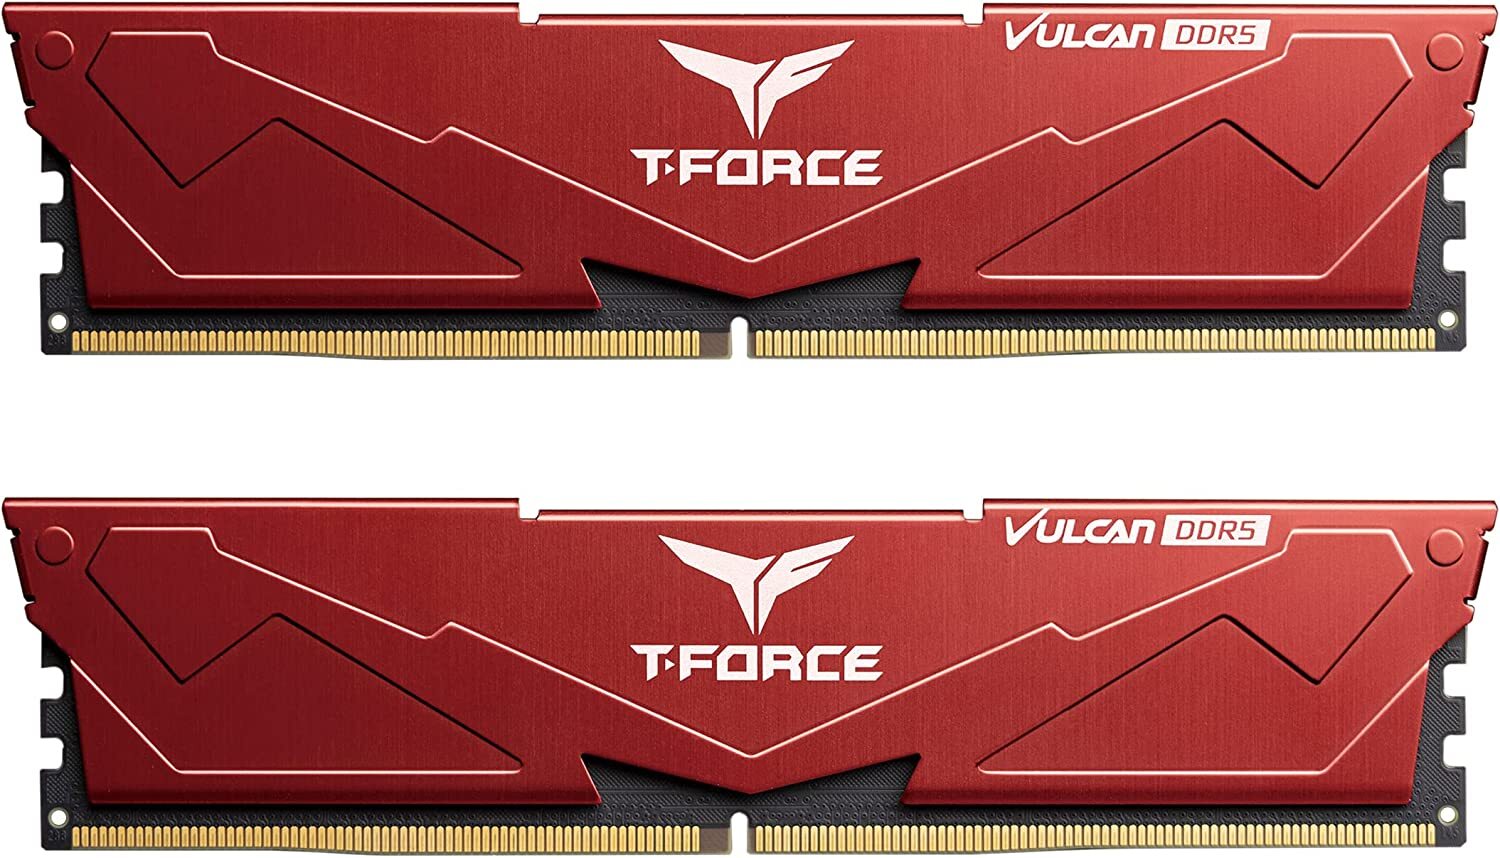 Team Group - Team Group Kit 64GB (2 x 32GB) DDR5 5200MHz Vulcan Red CL40